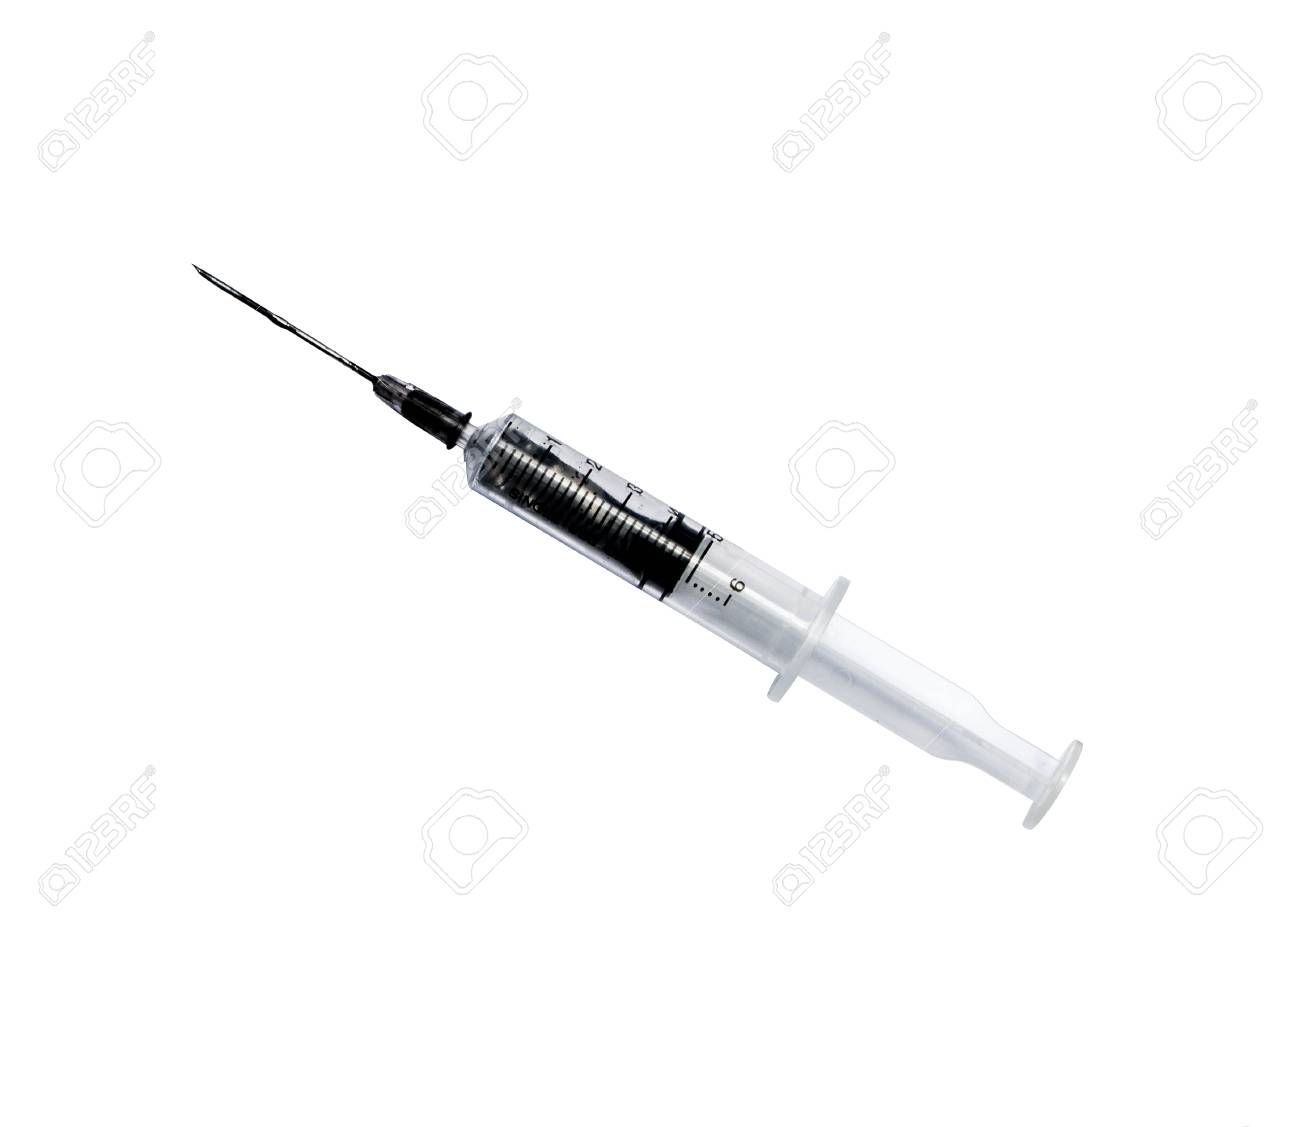 Injection Needle Isolated On White Background Stock Photo Picture